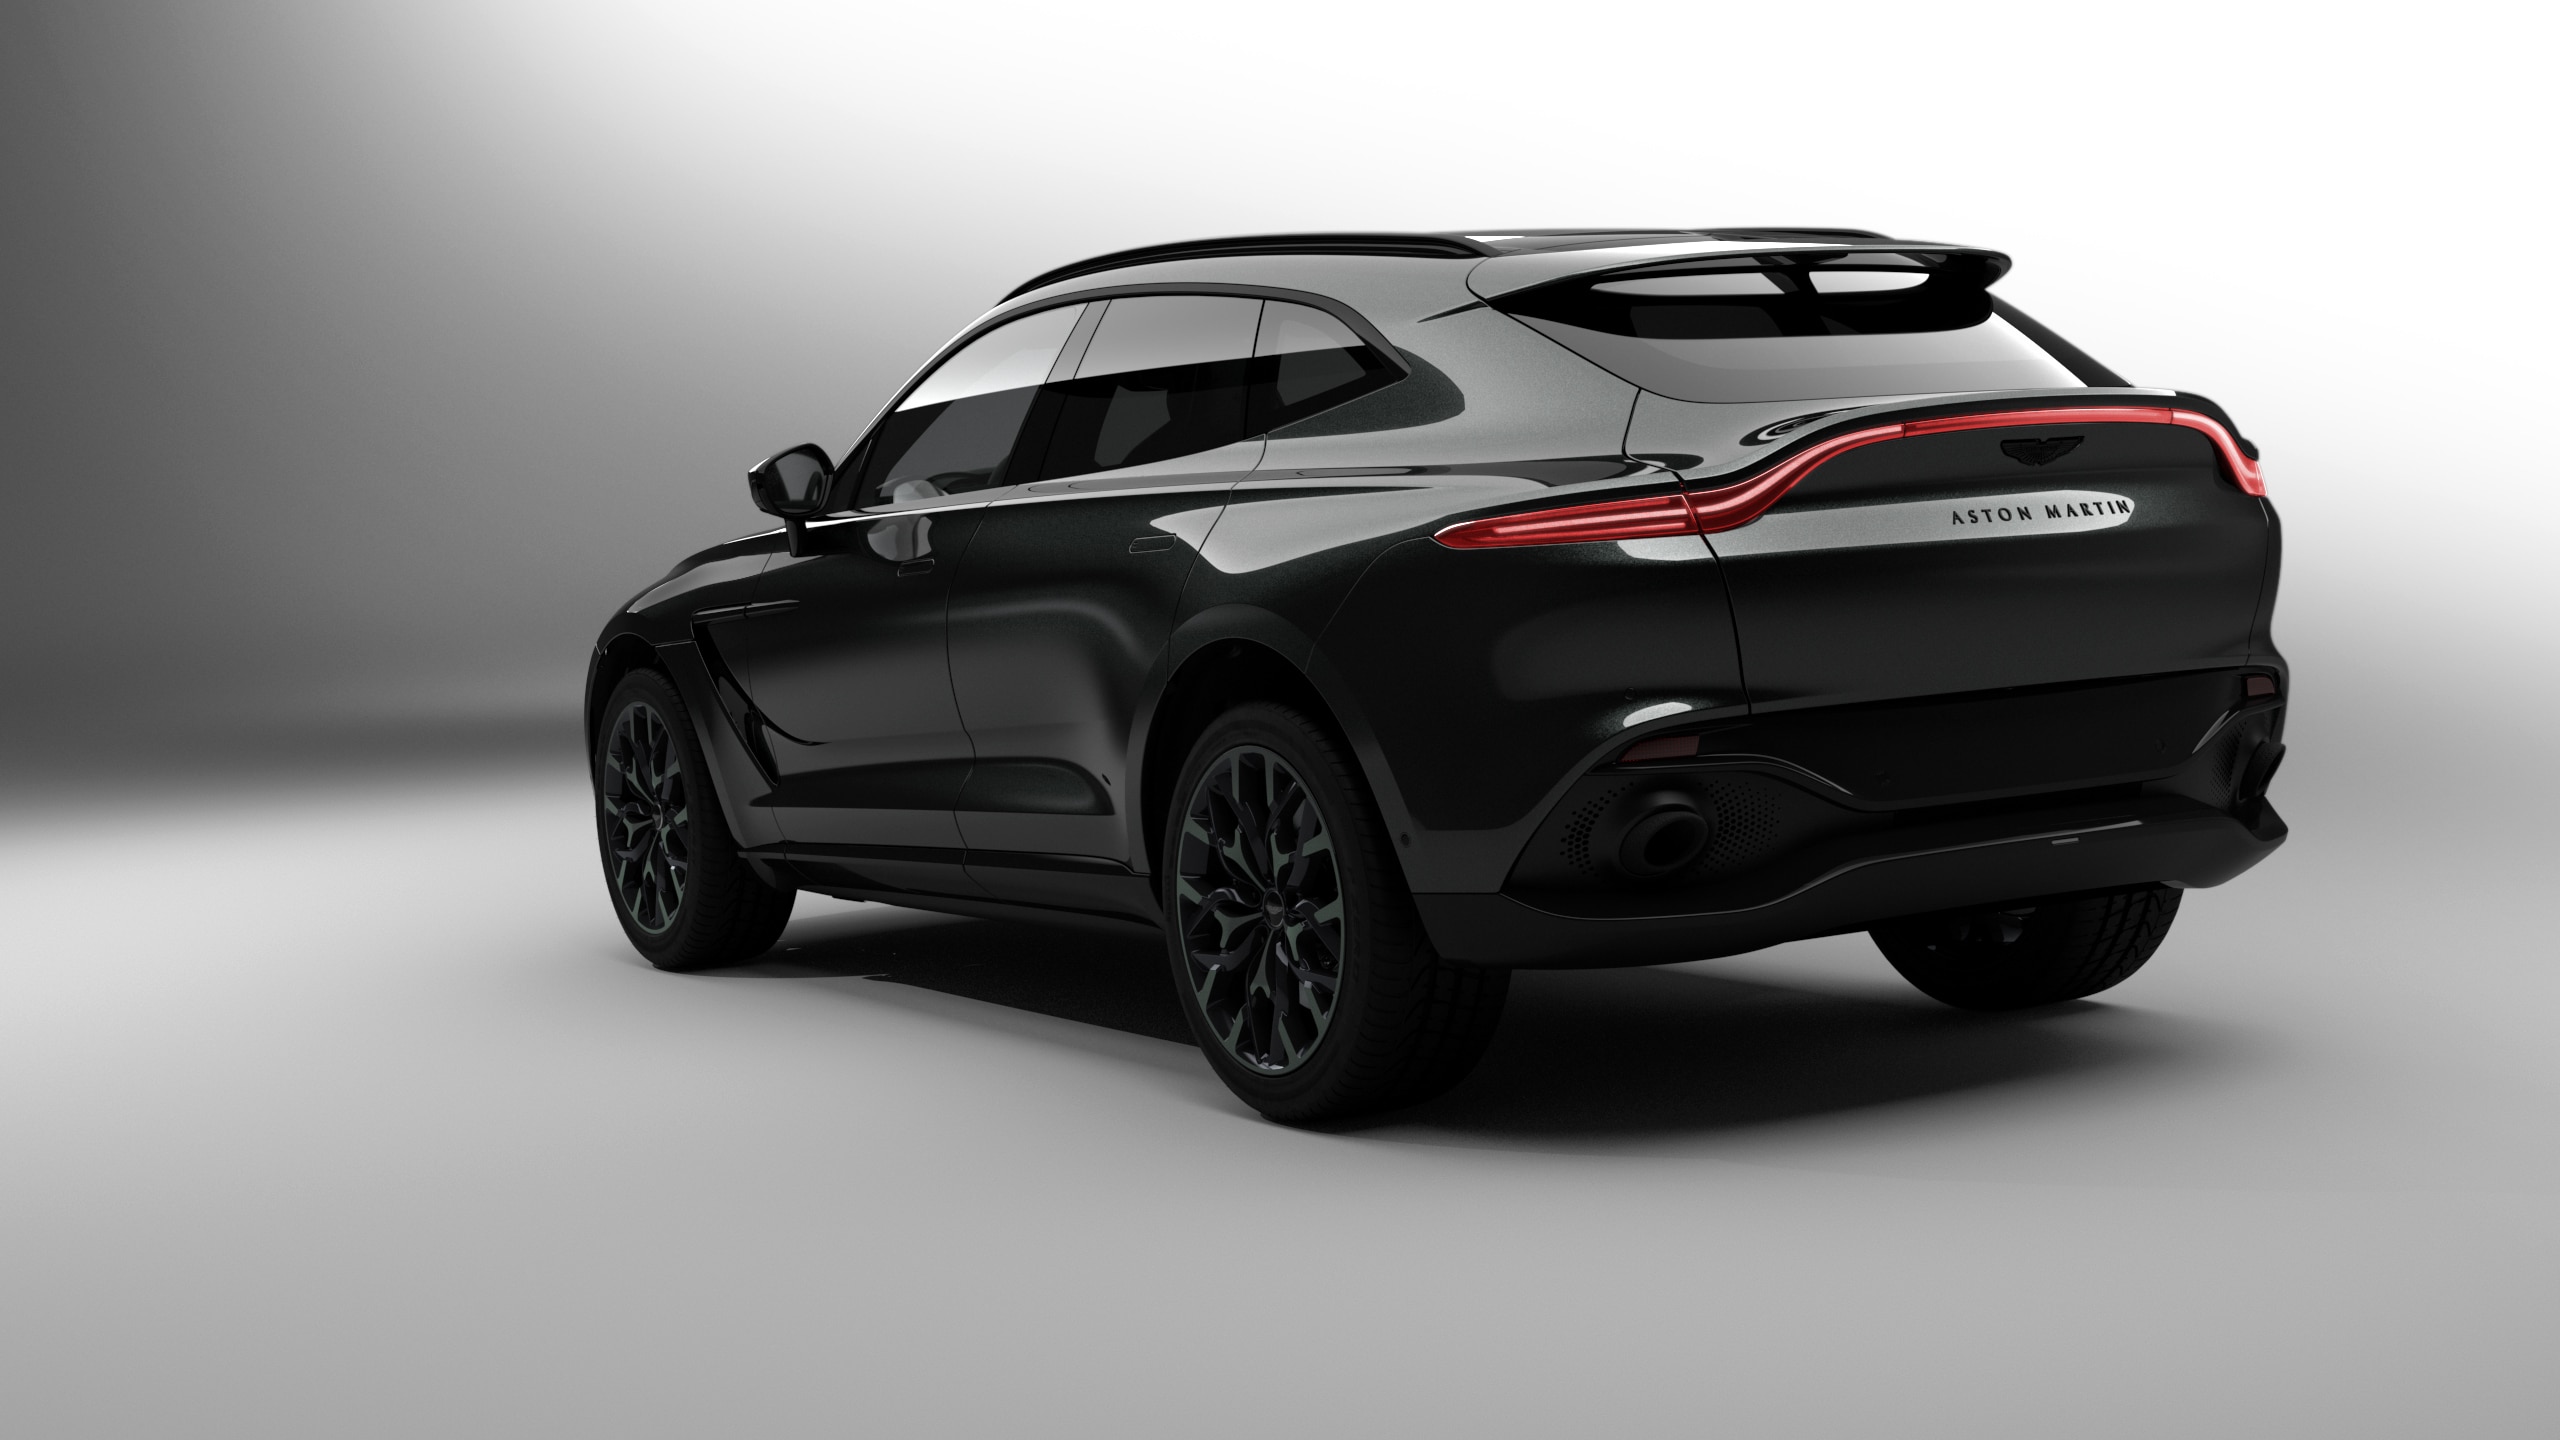 Special edition Aston Martin DBX is the first time the car maker has collaborated with an architect.